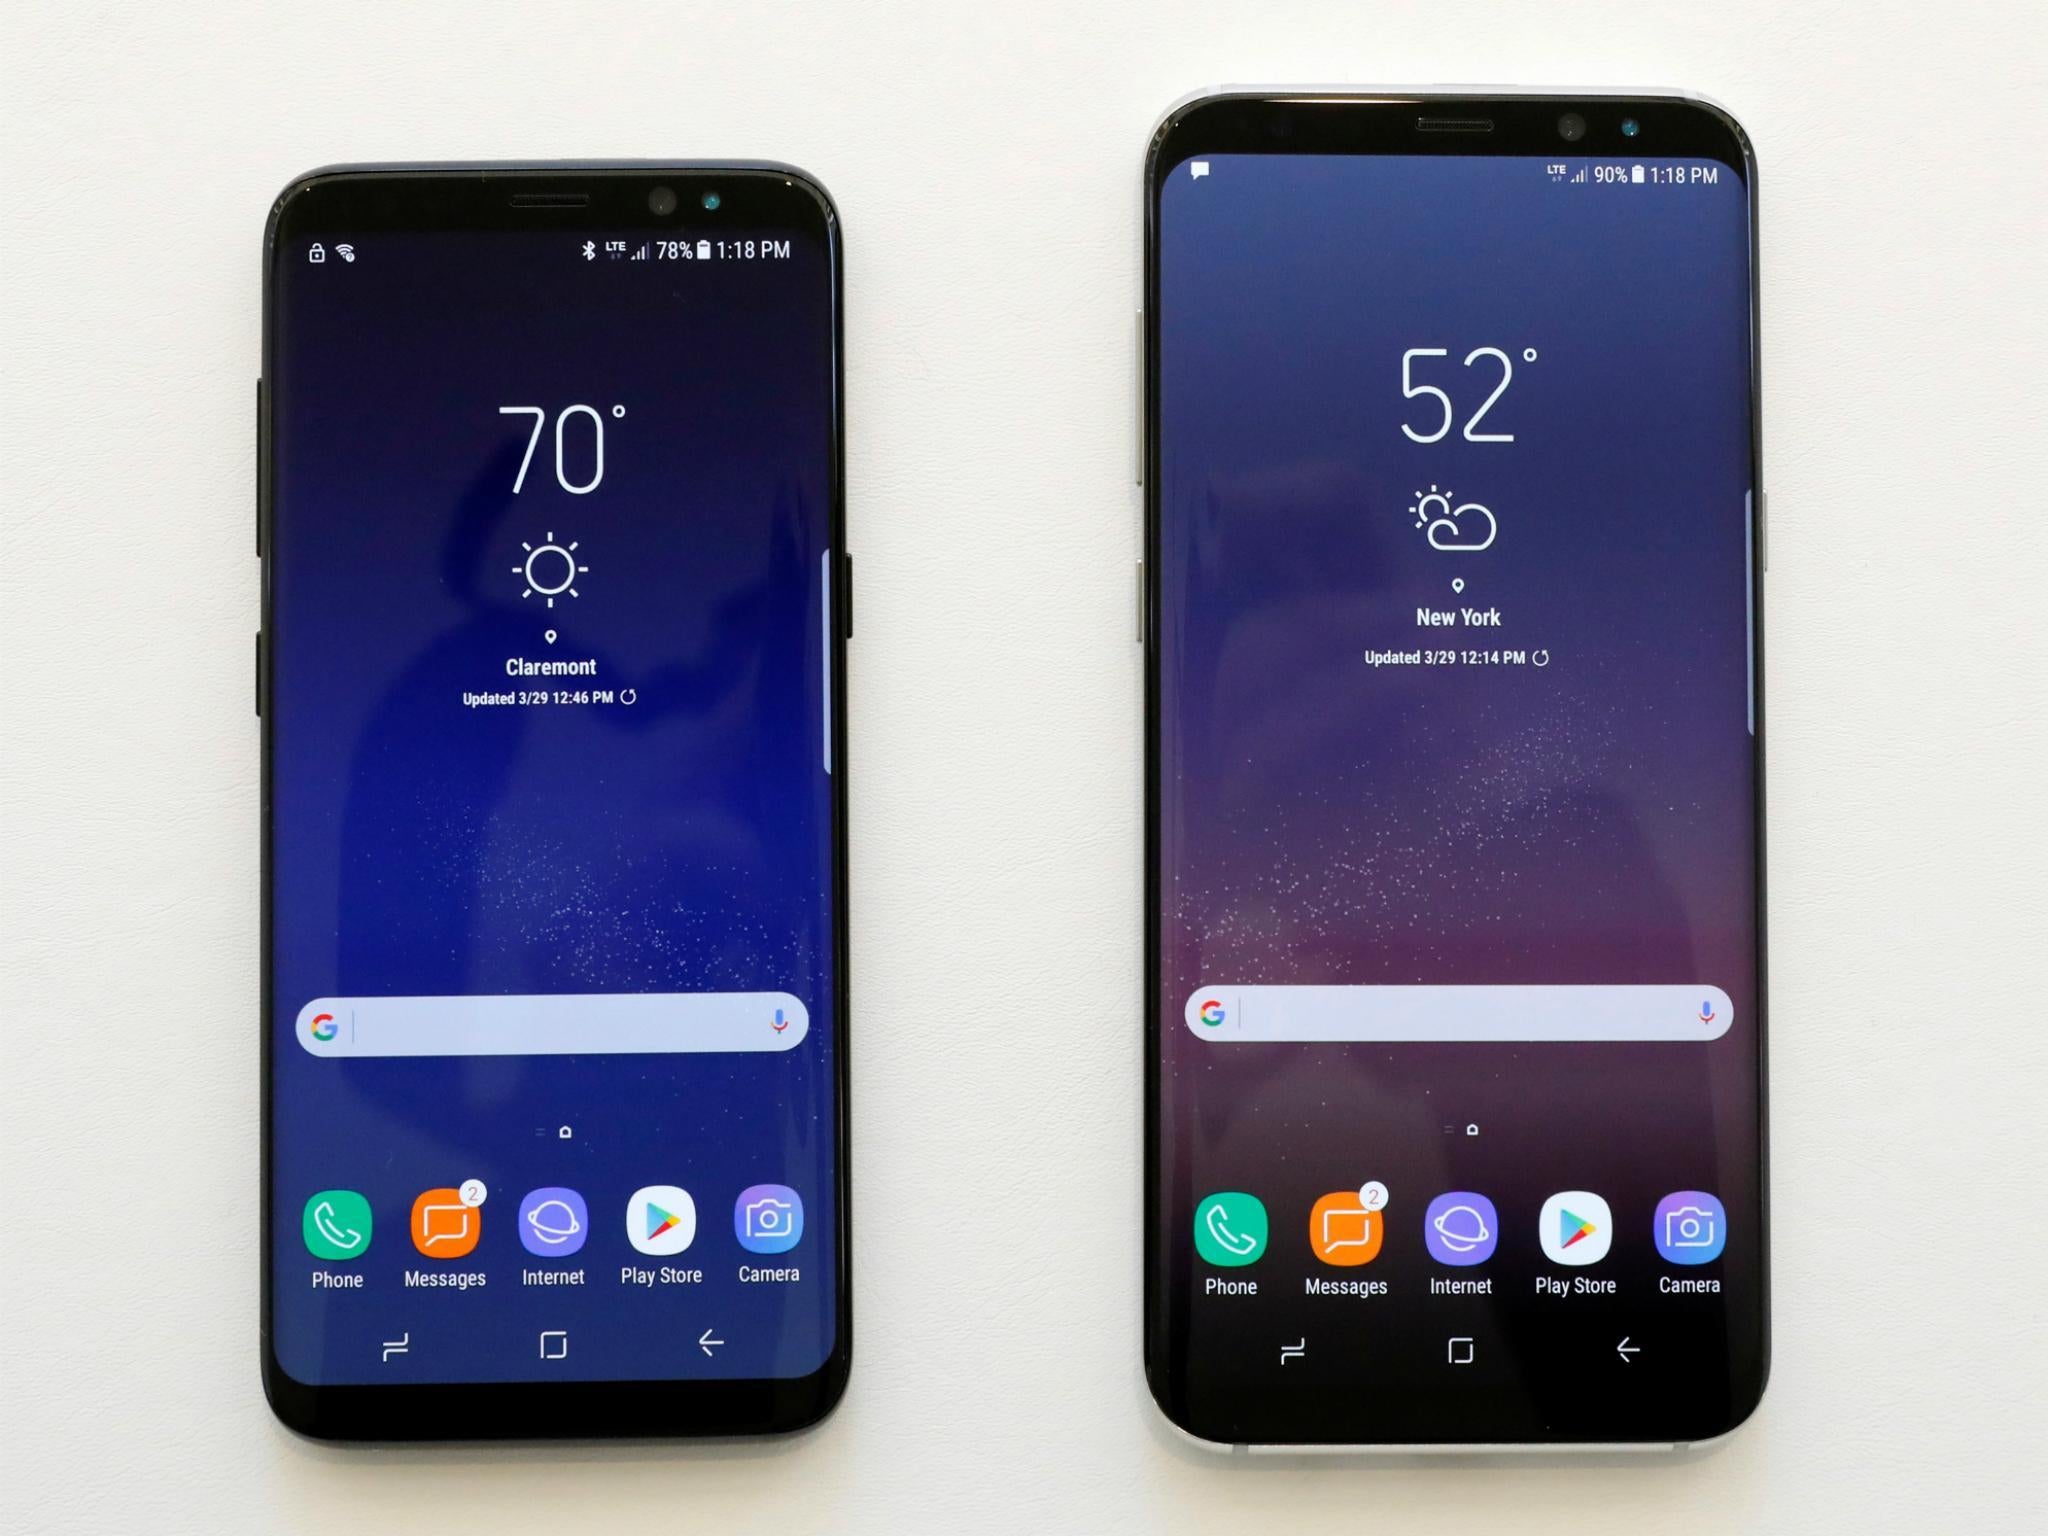 Samsung Galaxy S9: New smartphone to launch on 25 February